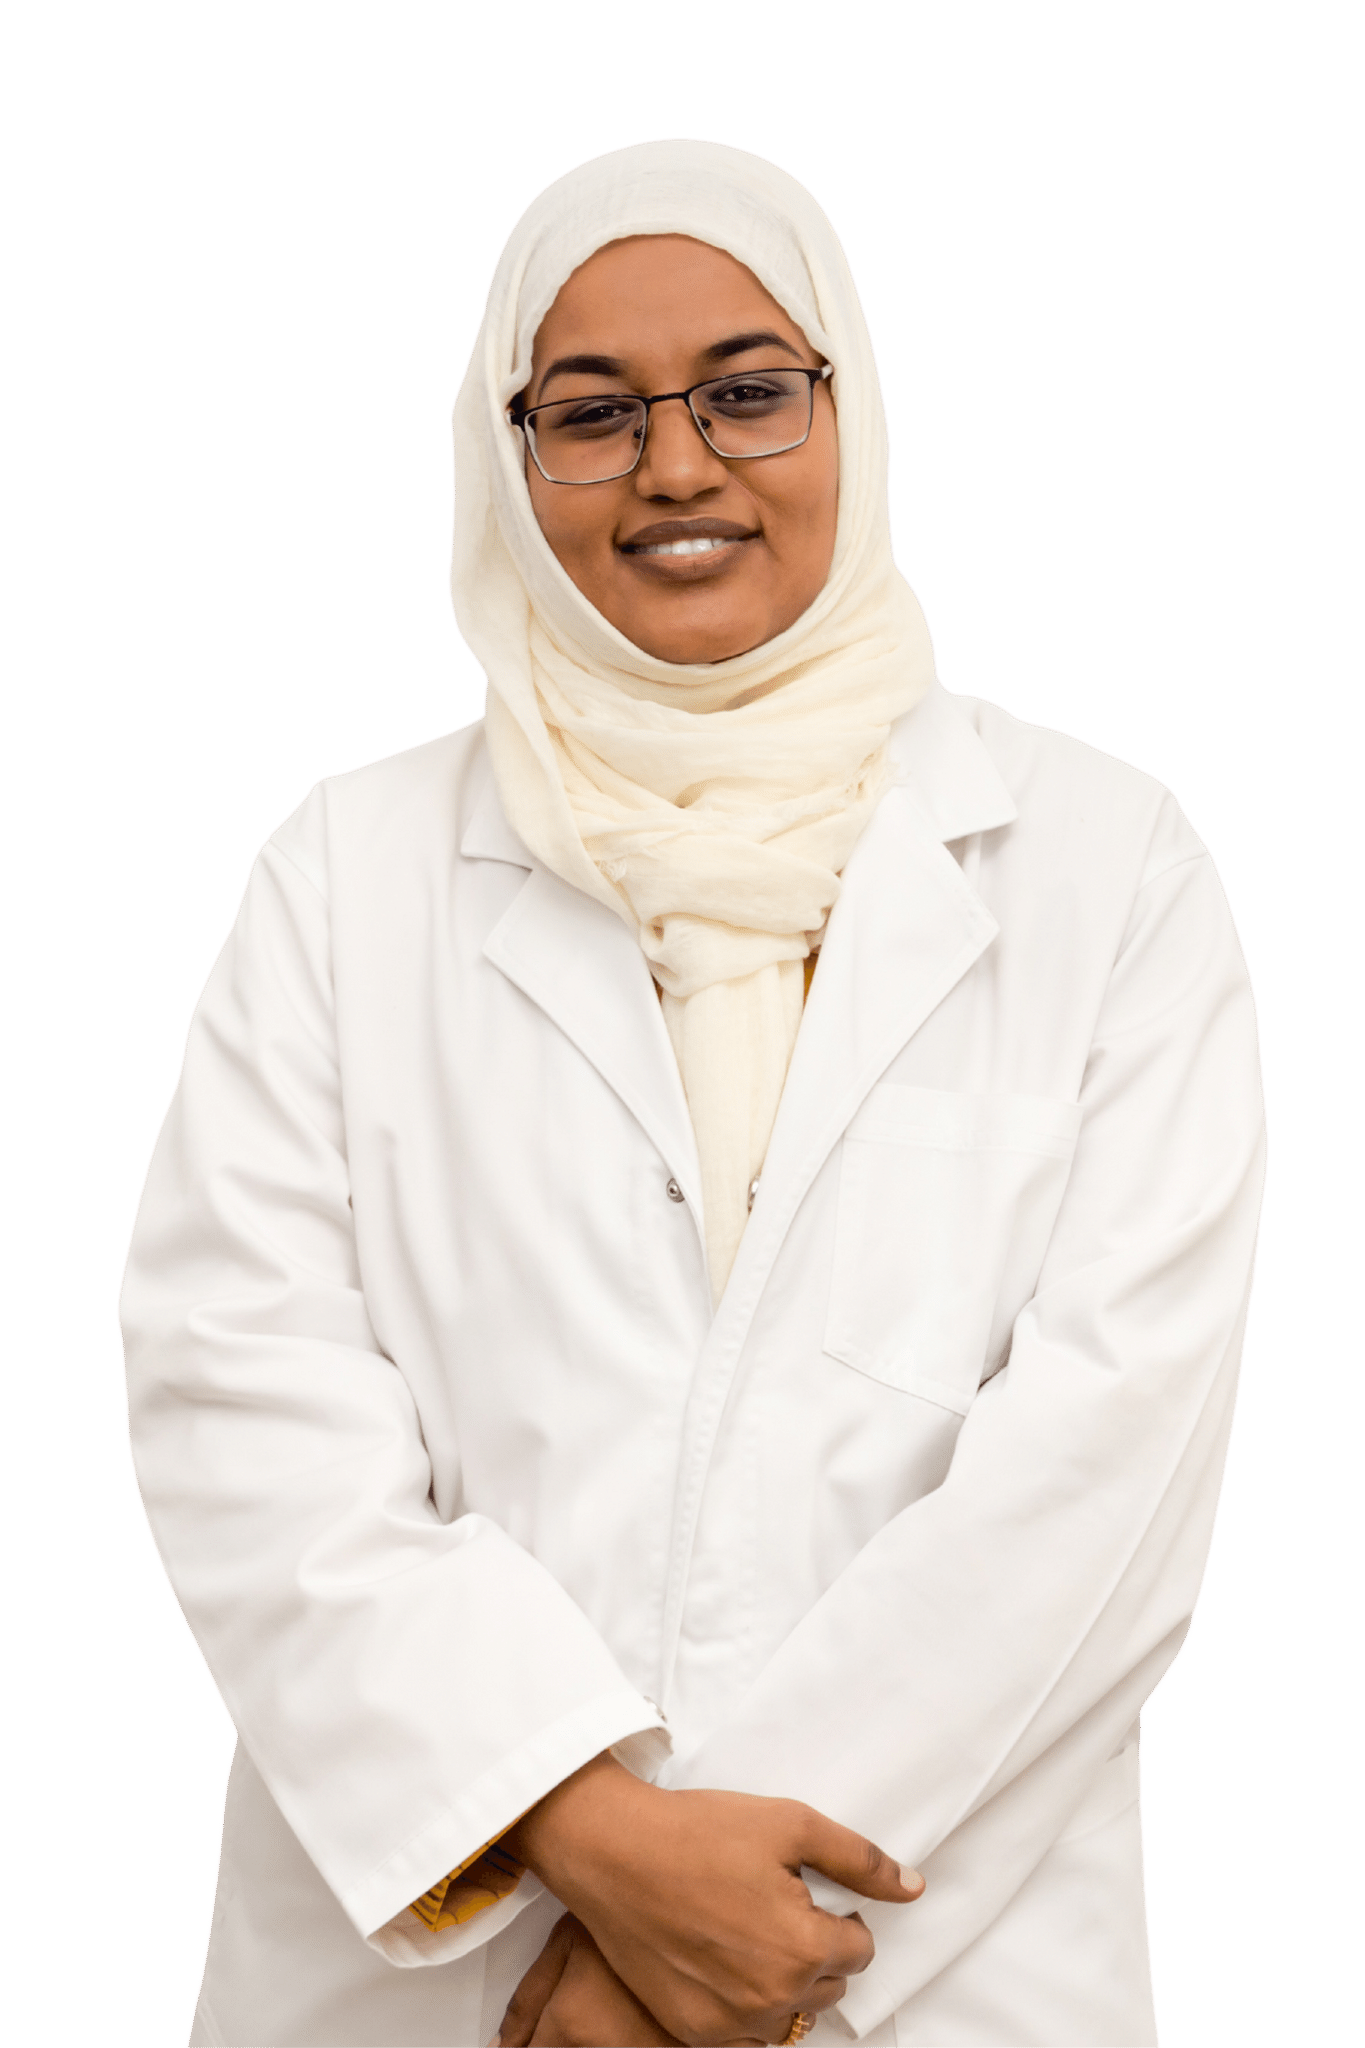 This is Dr Hala Mohamednours image